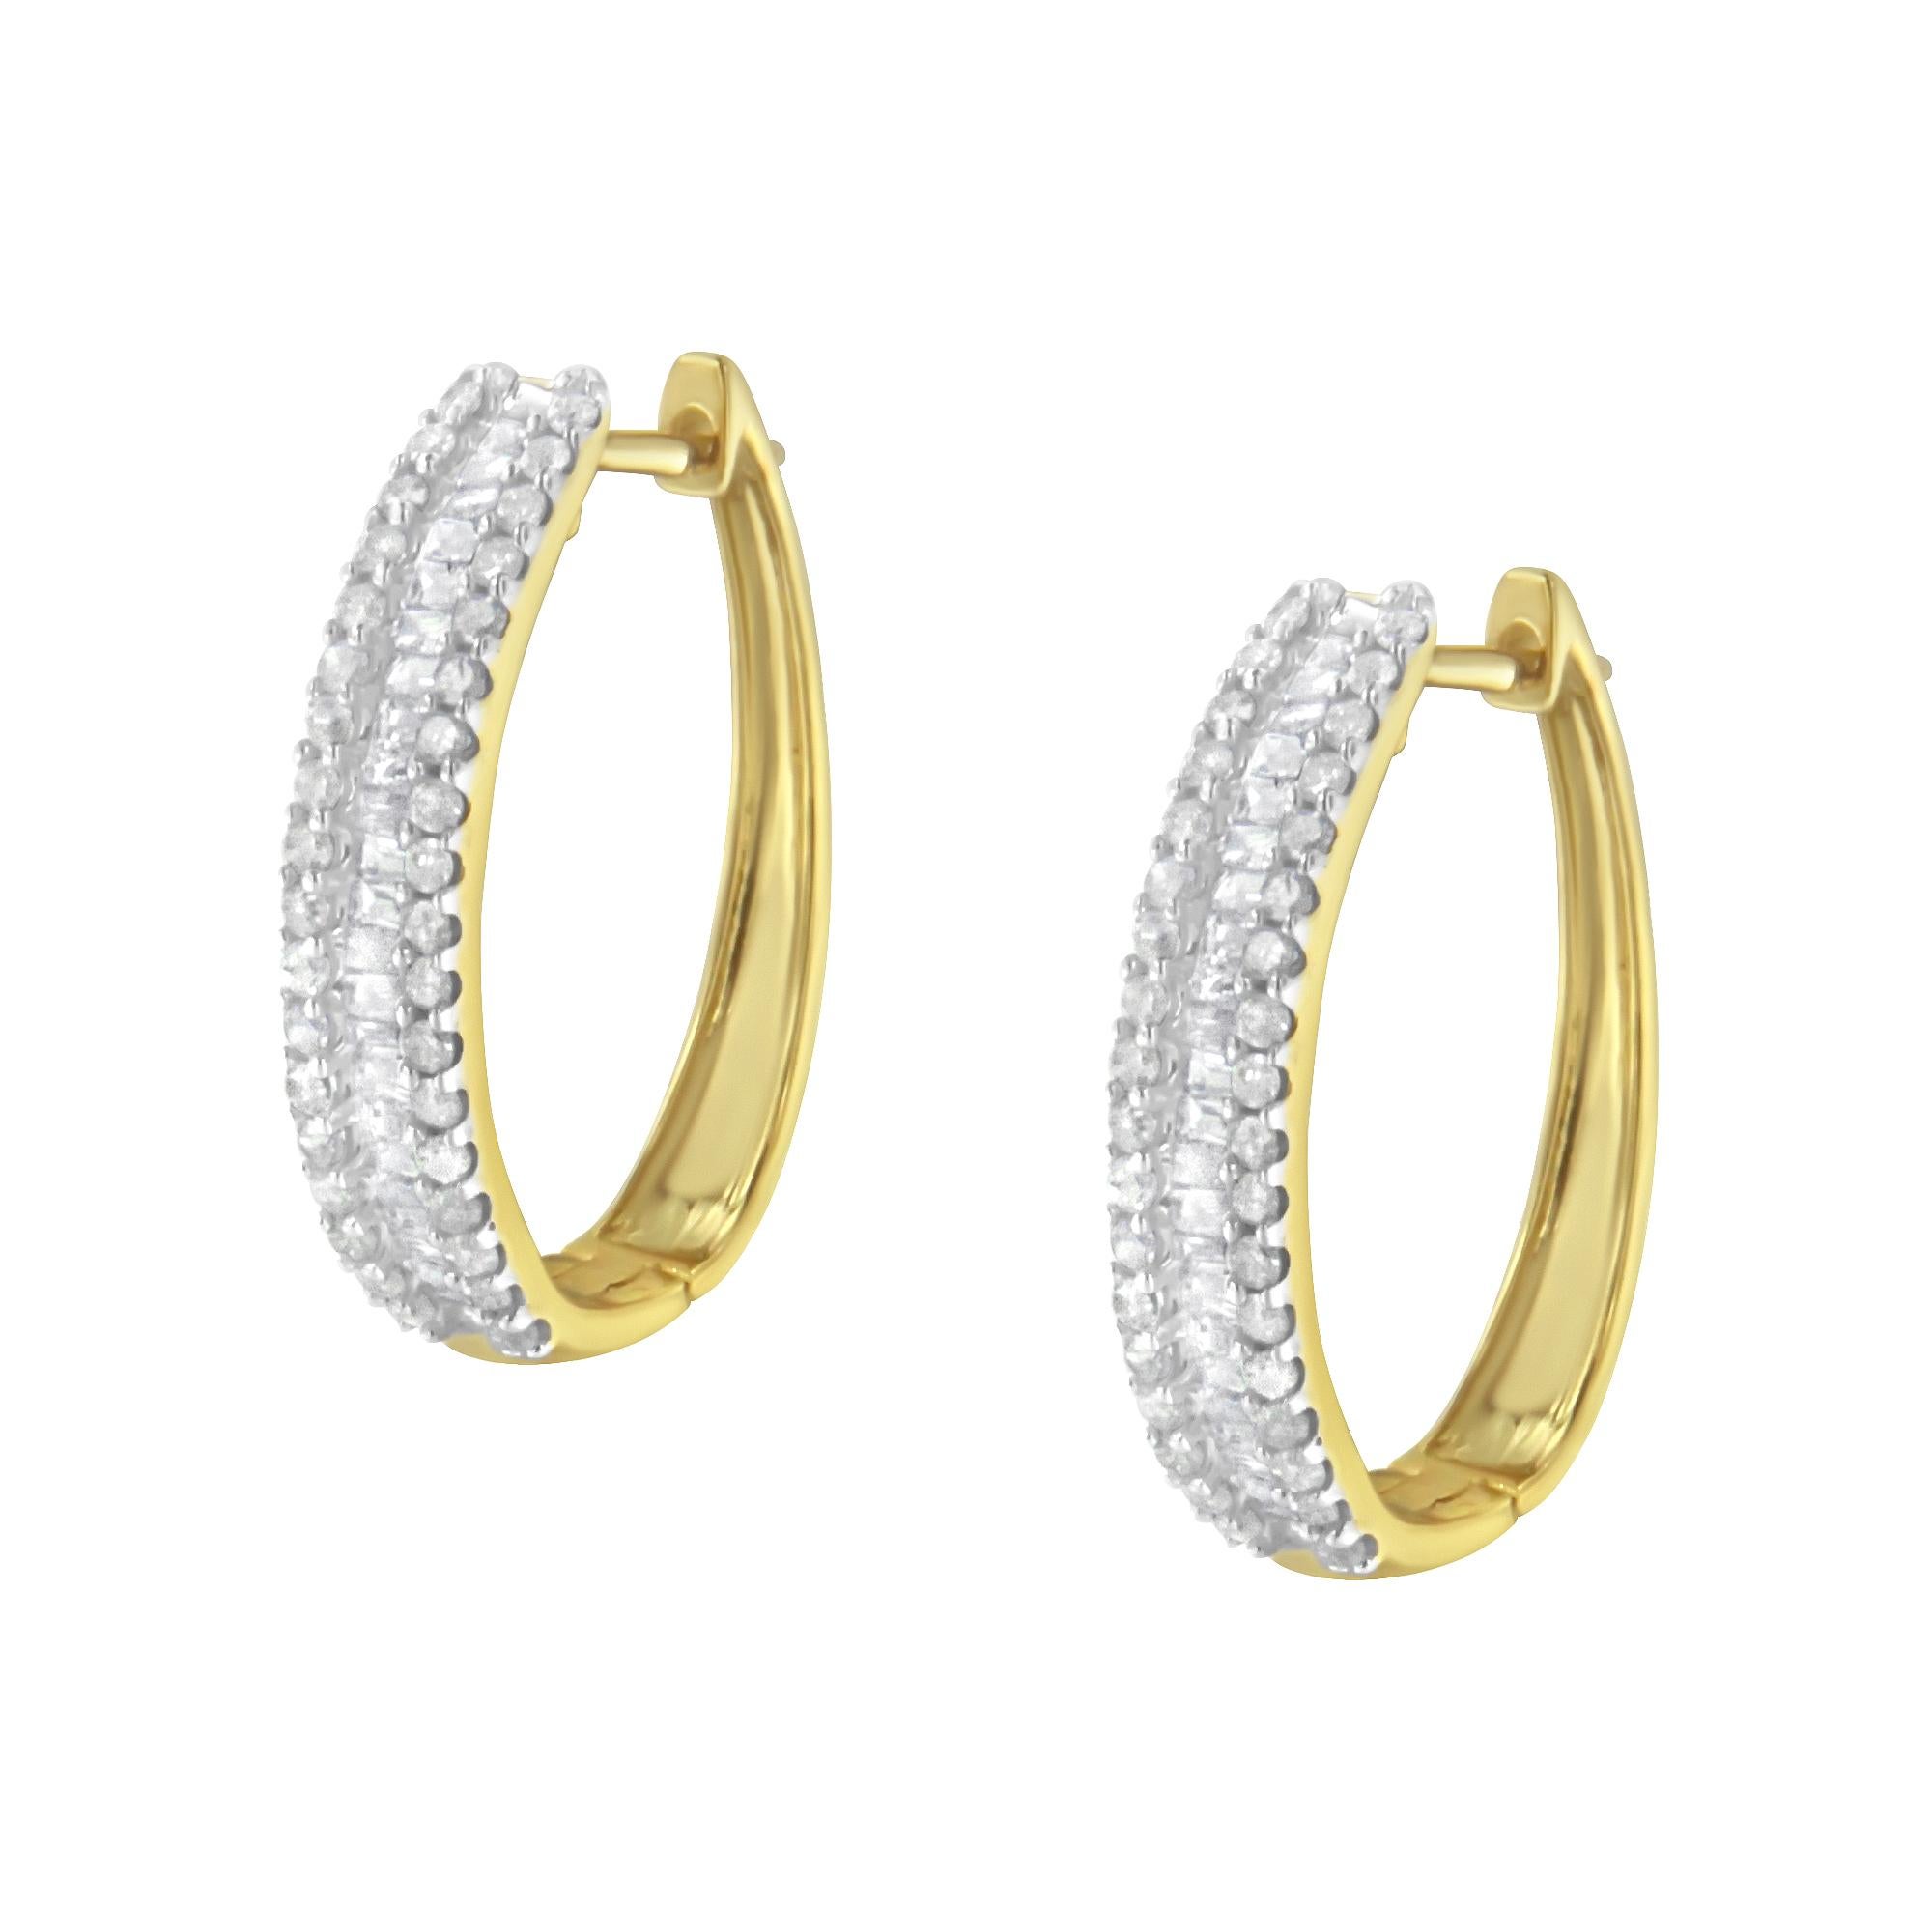 10K Yellow Gold 3/4 Carat Diamond Hoop Earrings In New Condition For Sale In New York, NY